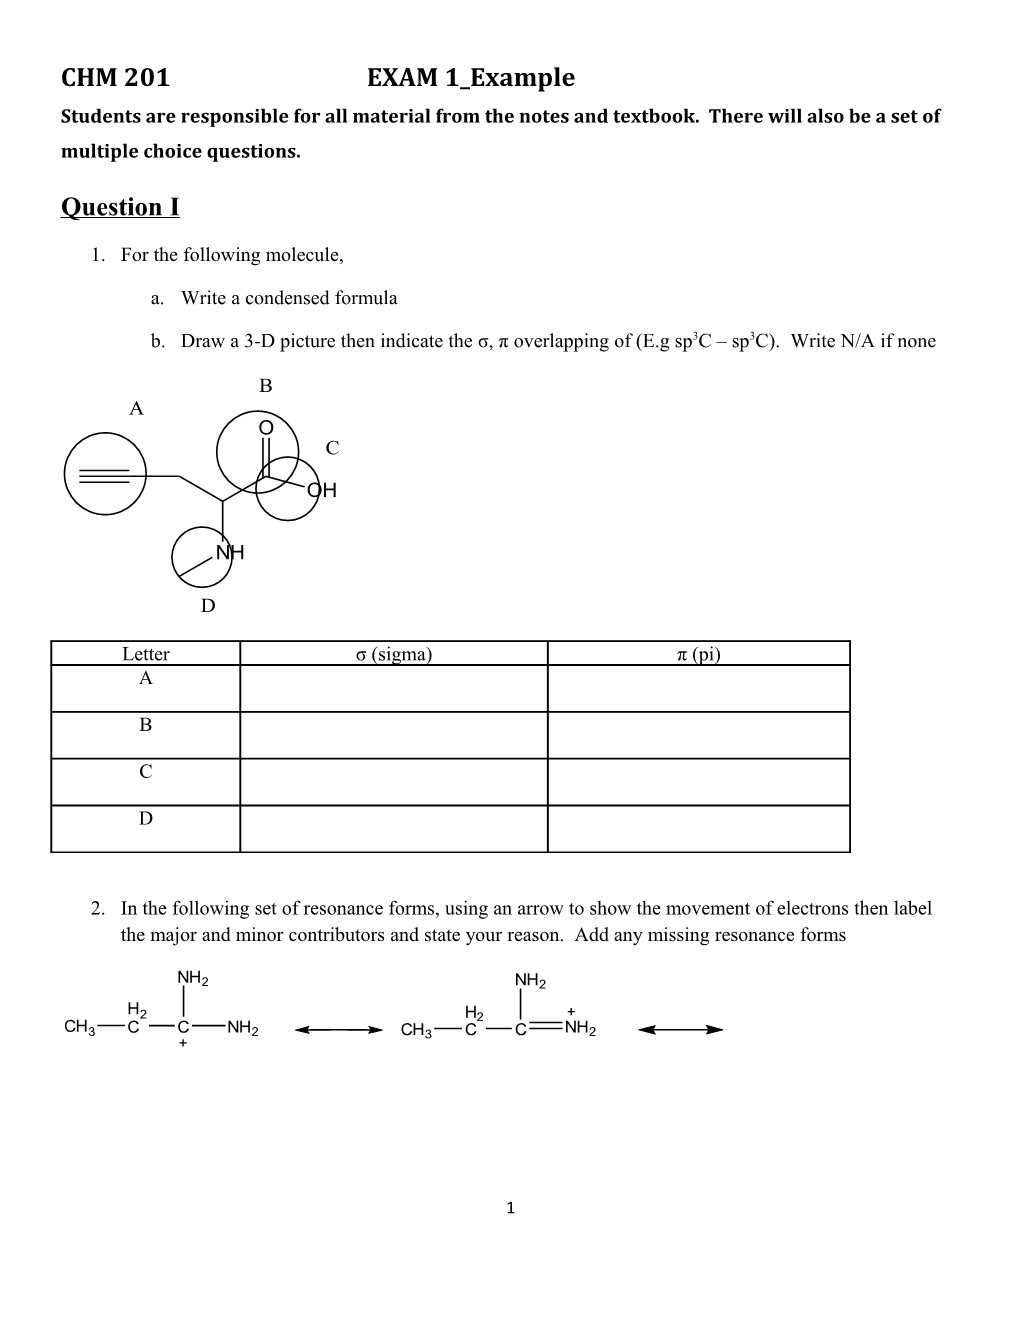 CHM 201 EXAM 1 Example Students Are Responsible for All Material from the Notes and Textbook